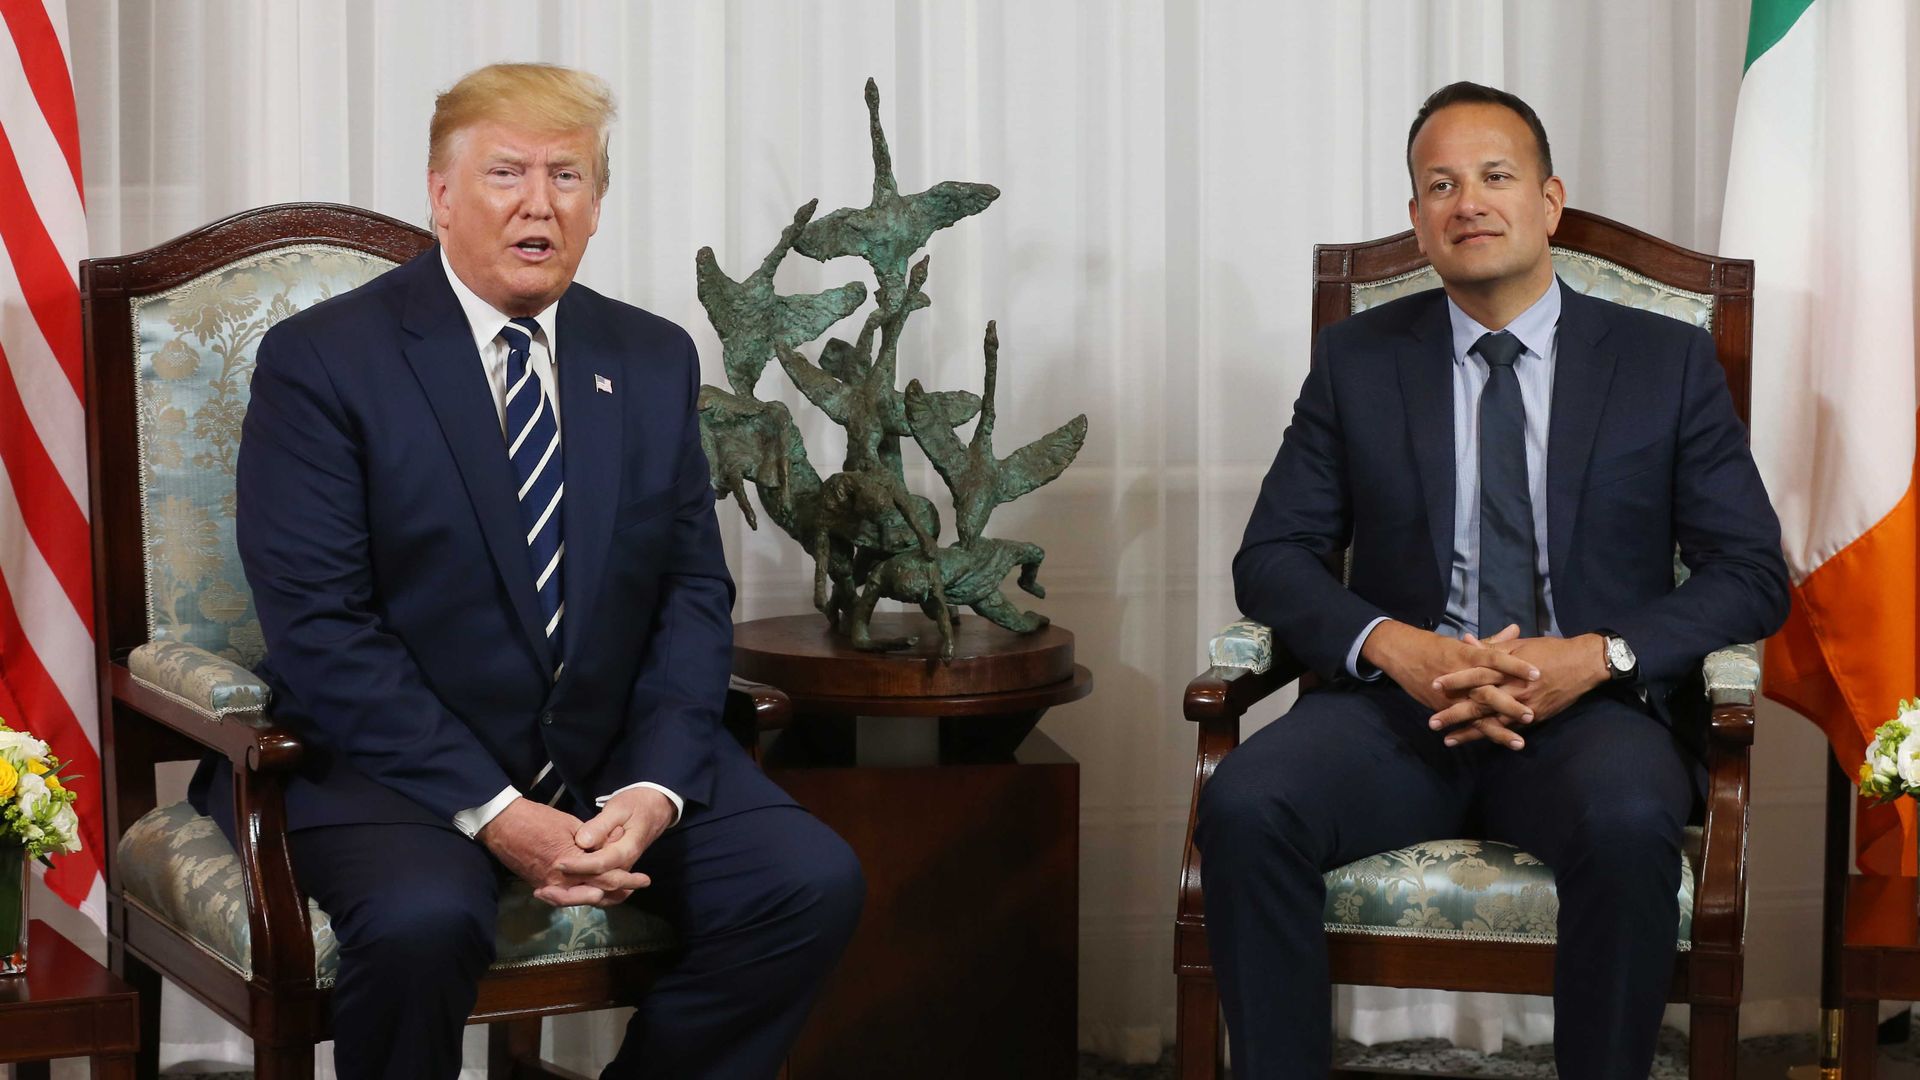  President Donald Trump during a bilateral meeting with Taoiseach Leo Varadkar at Shannon airport on June 5, 2019 in Shannon, Ireland. 